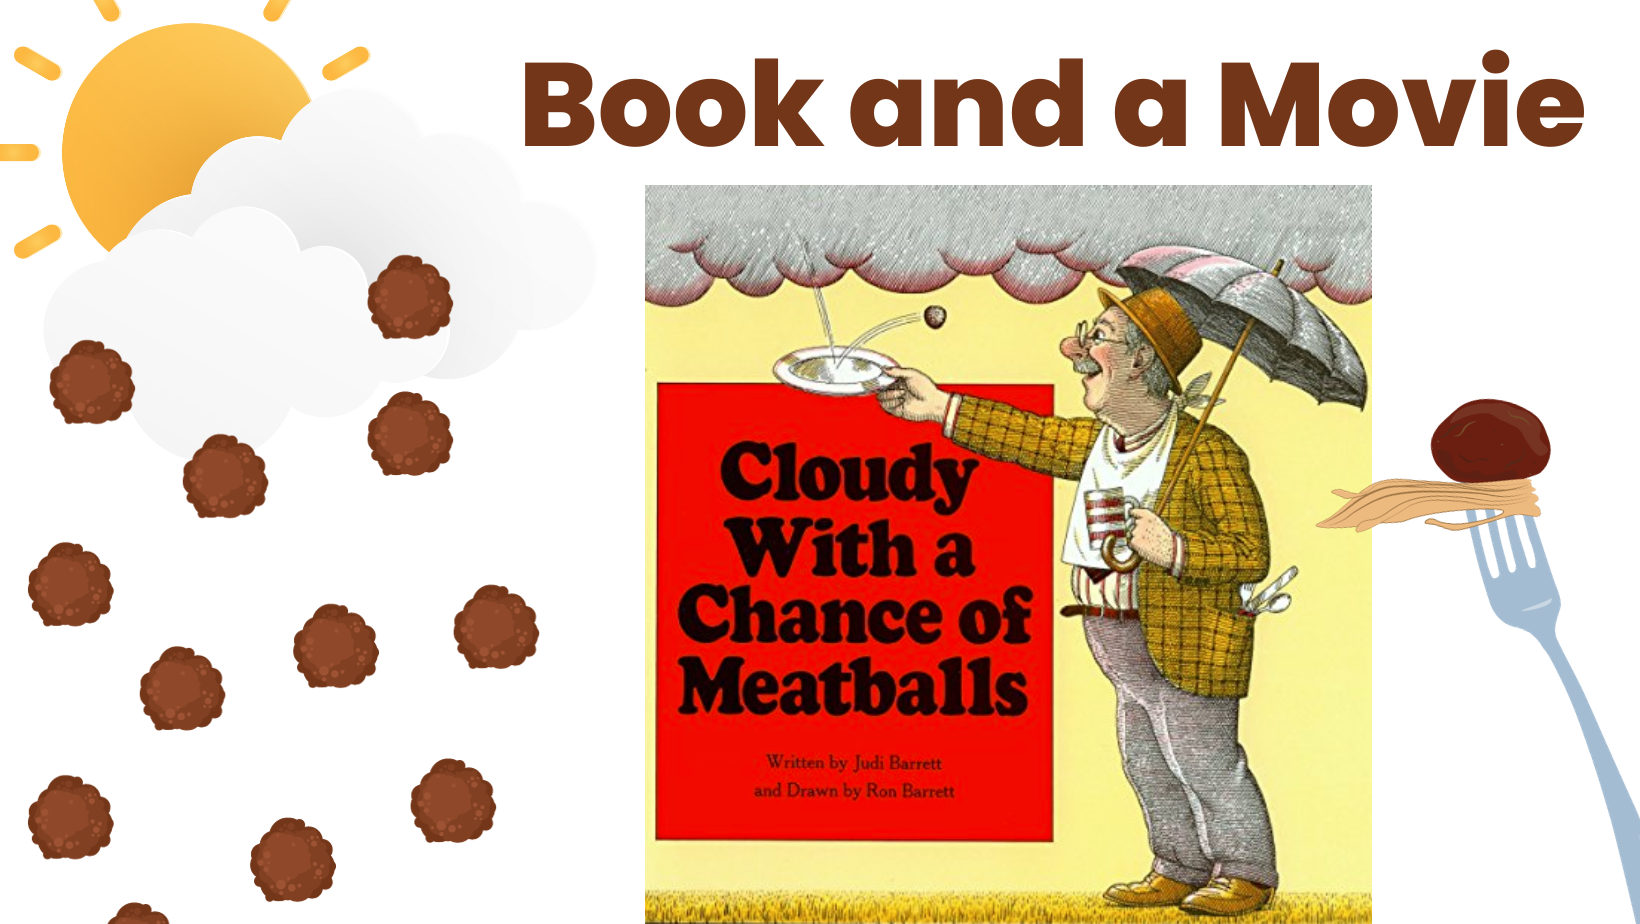 Cloud with falling meatballs and book cover of Cloudy with a Chance of Meatballs